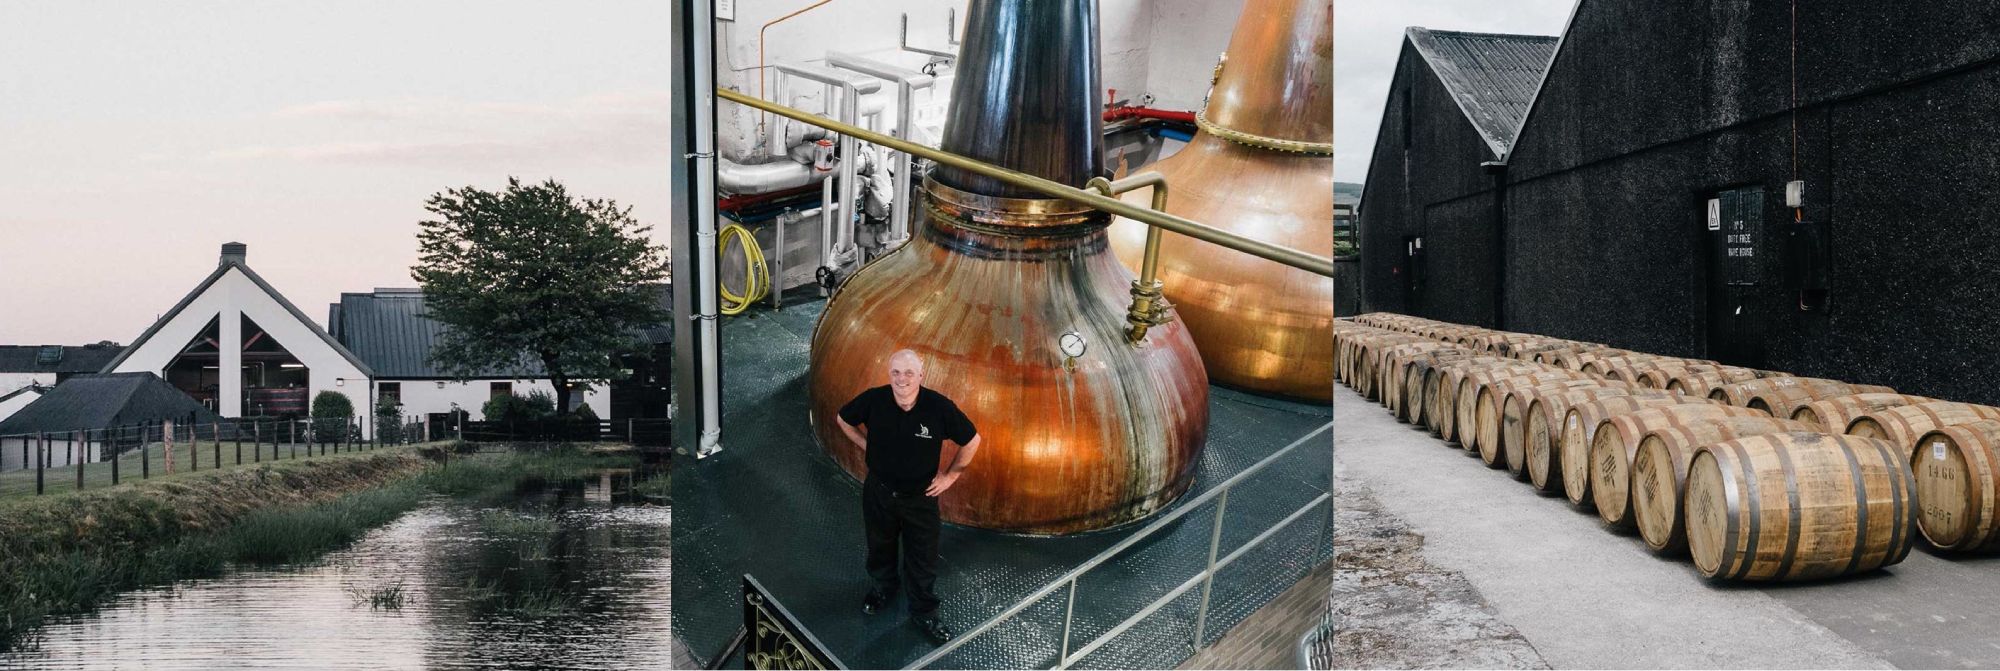 Win a trip to Fettercairn distillery with Hedonism Wines